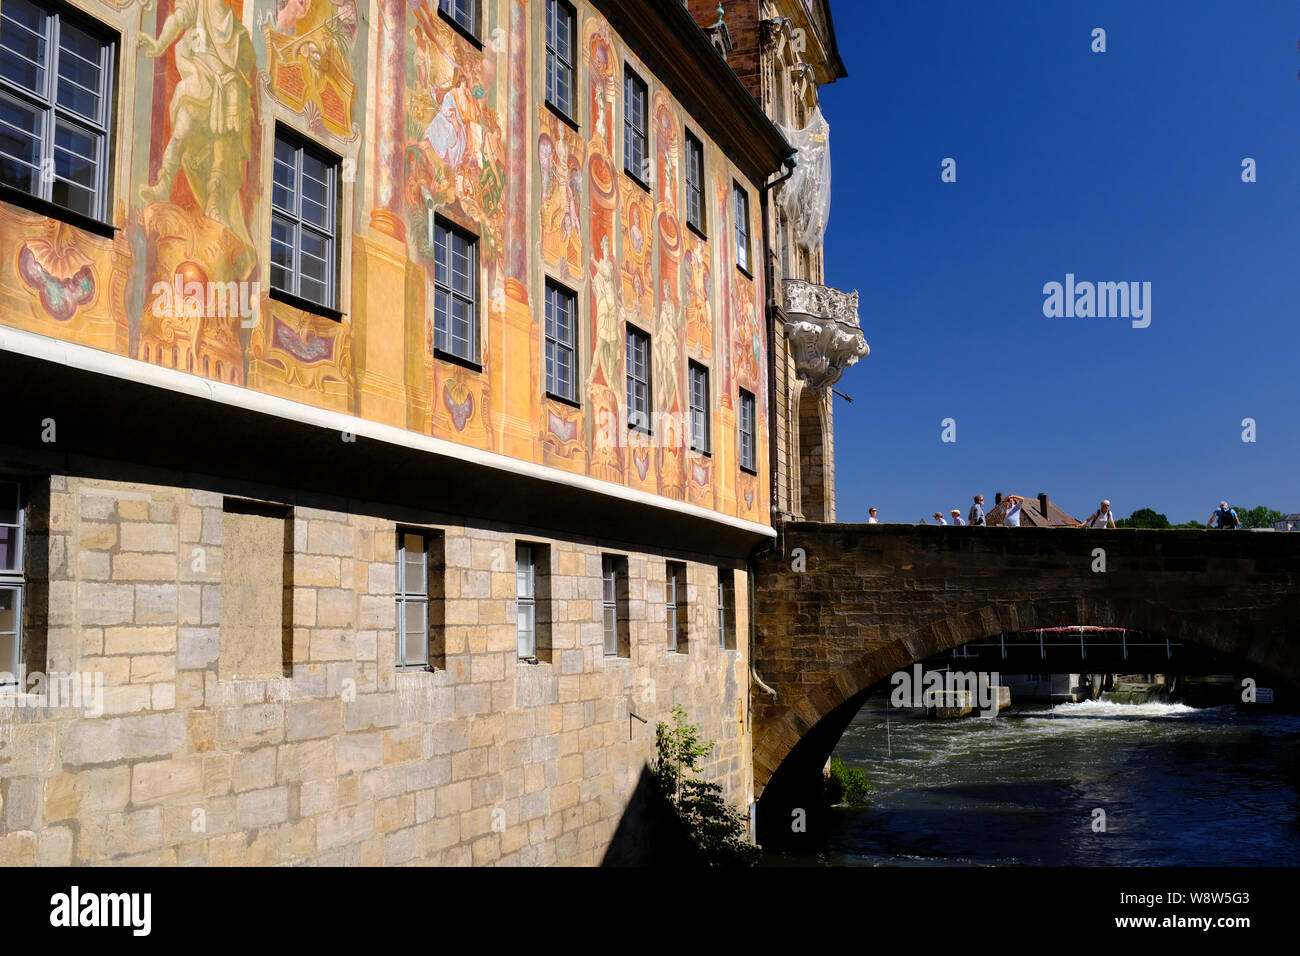 Murals on the Old town hall of Bamberg, Germany Stock Photo